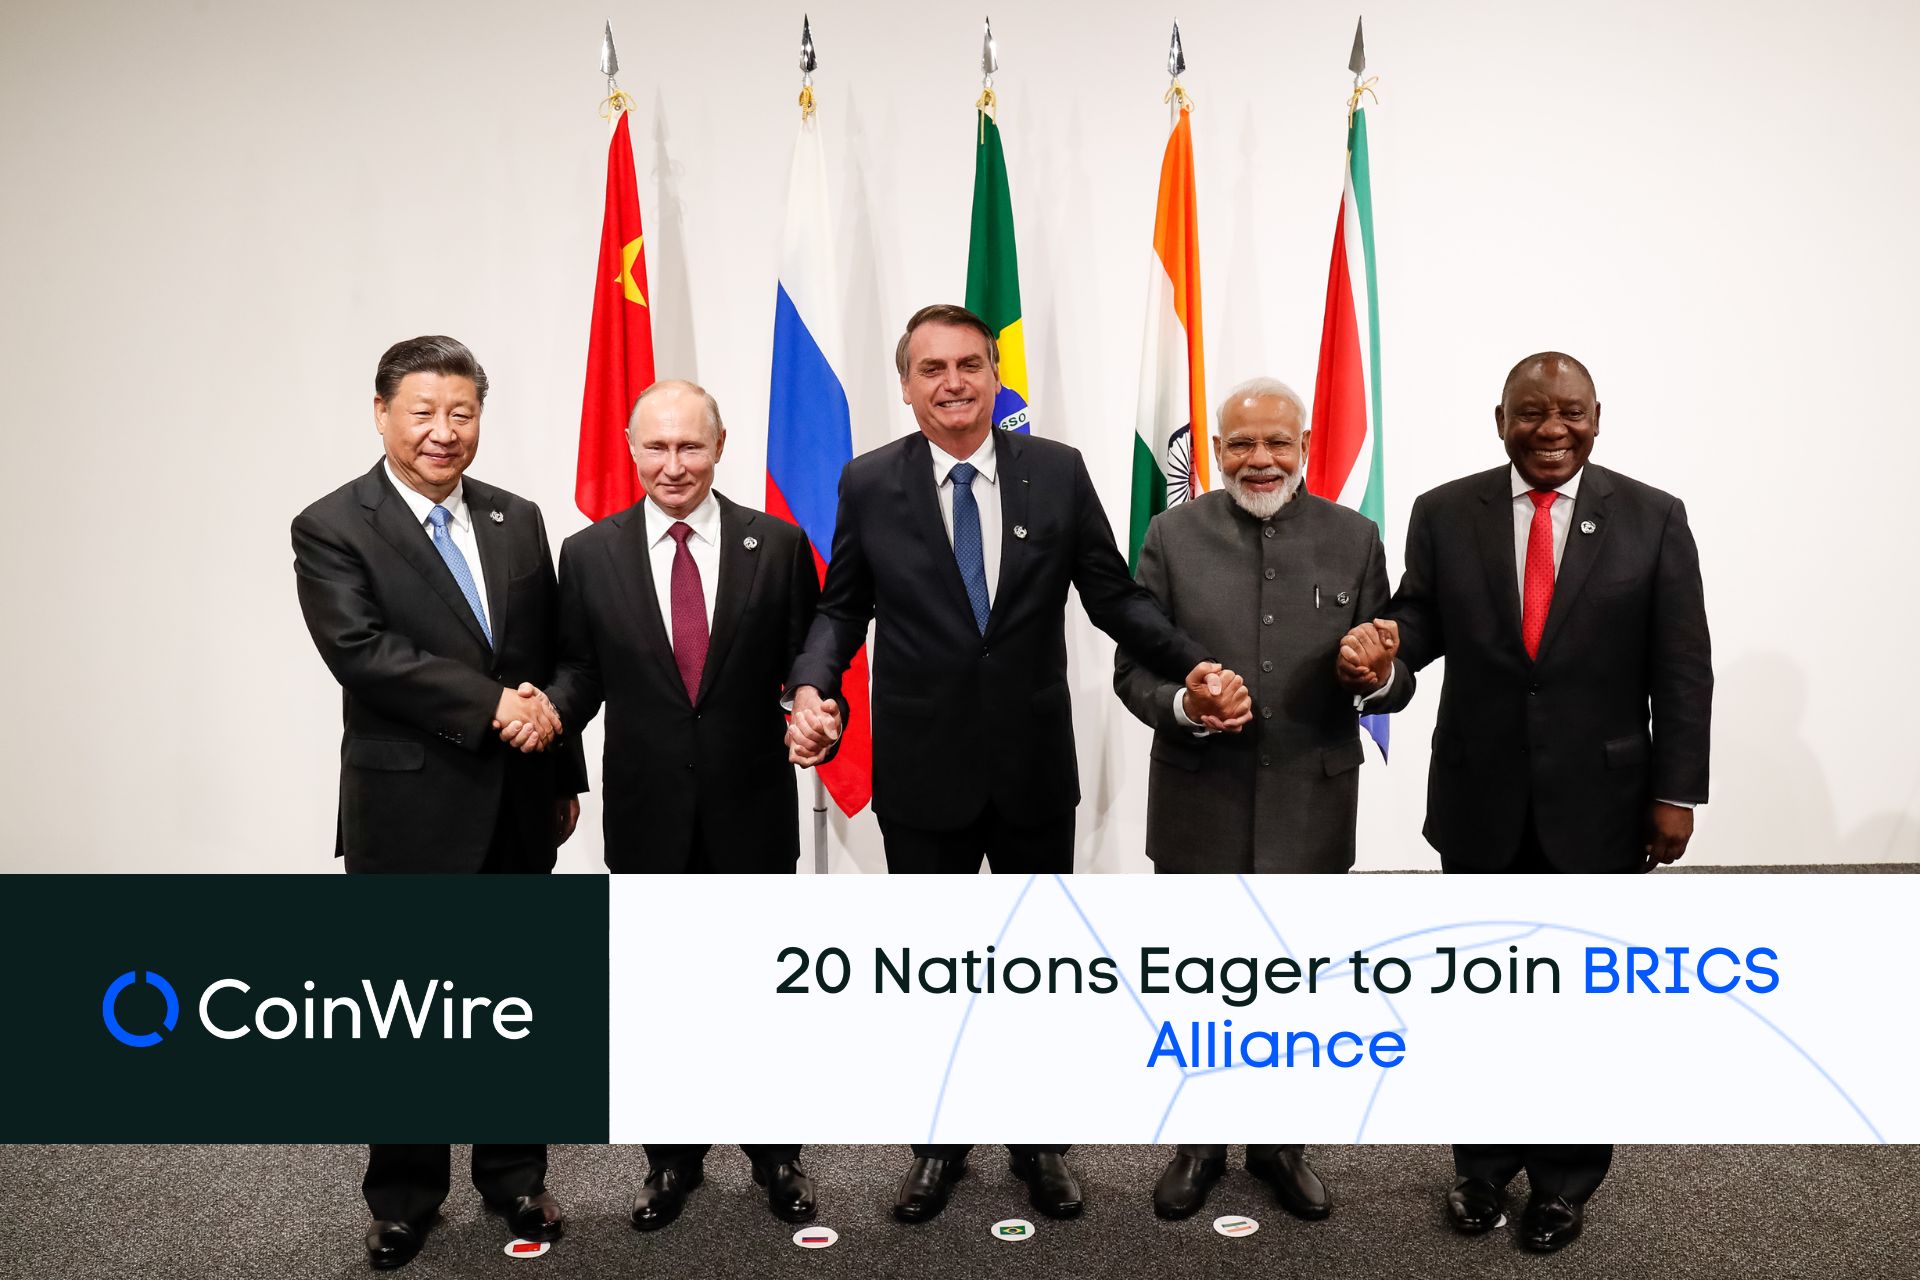 20 Nations Eager To Join Brics Alliance